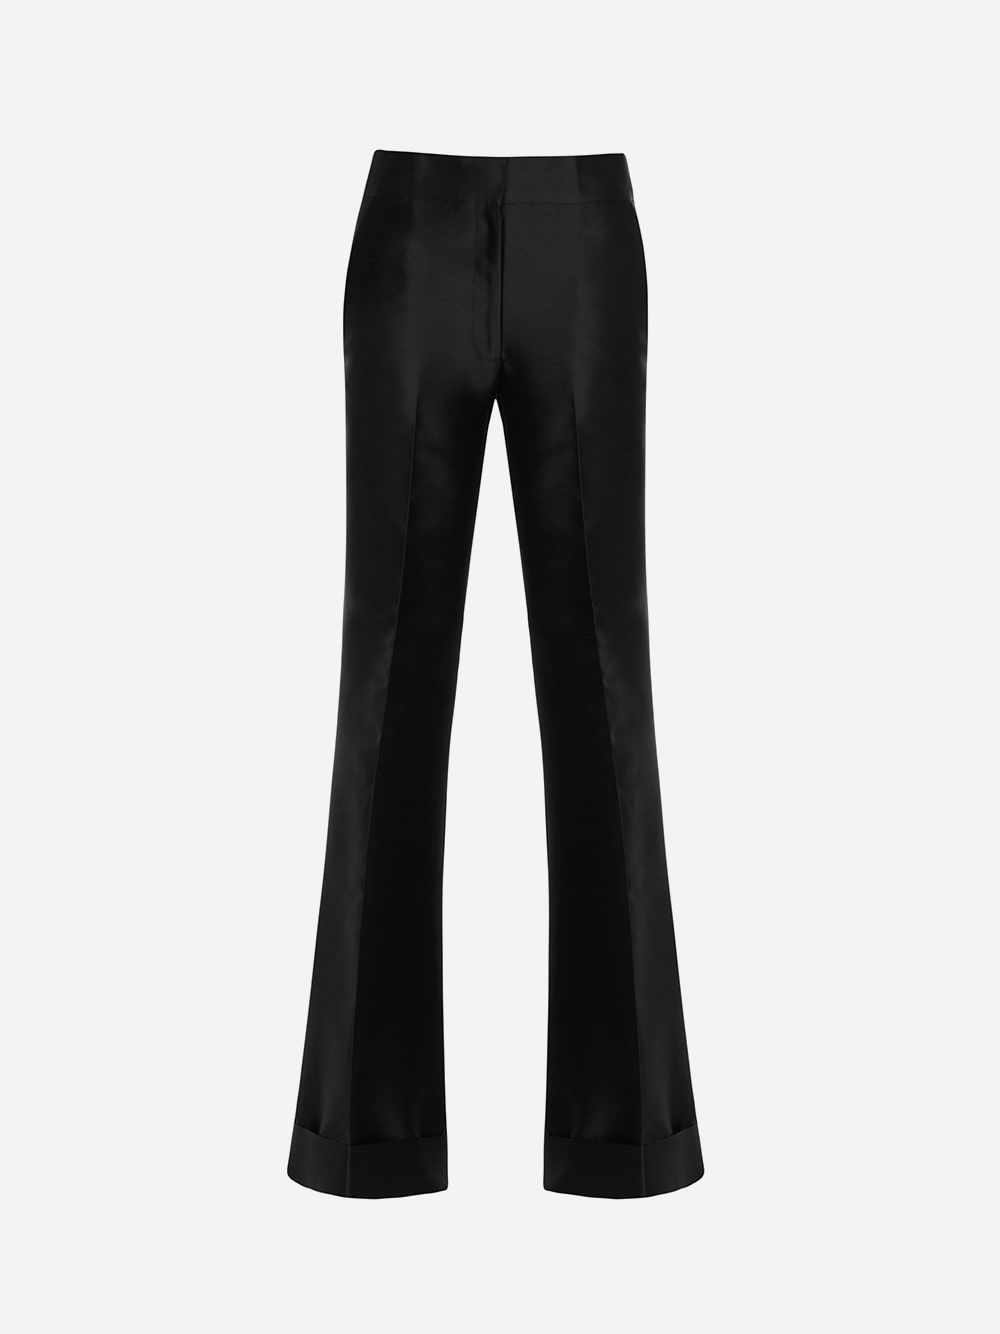 Black Bell Mouth Trousers | Diogo Miranda